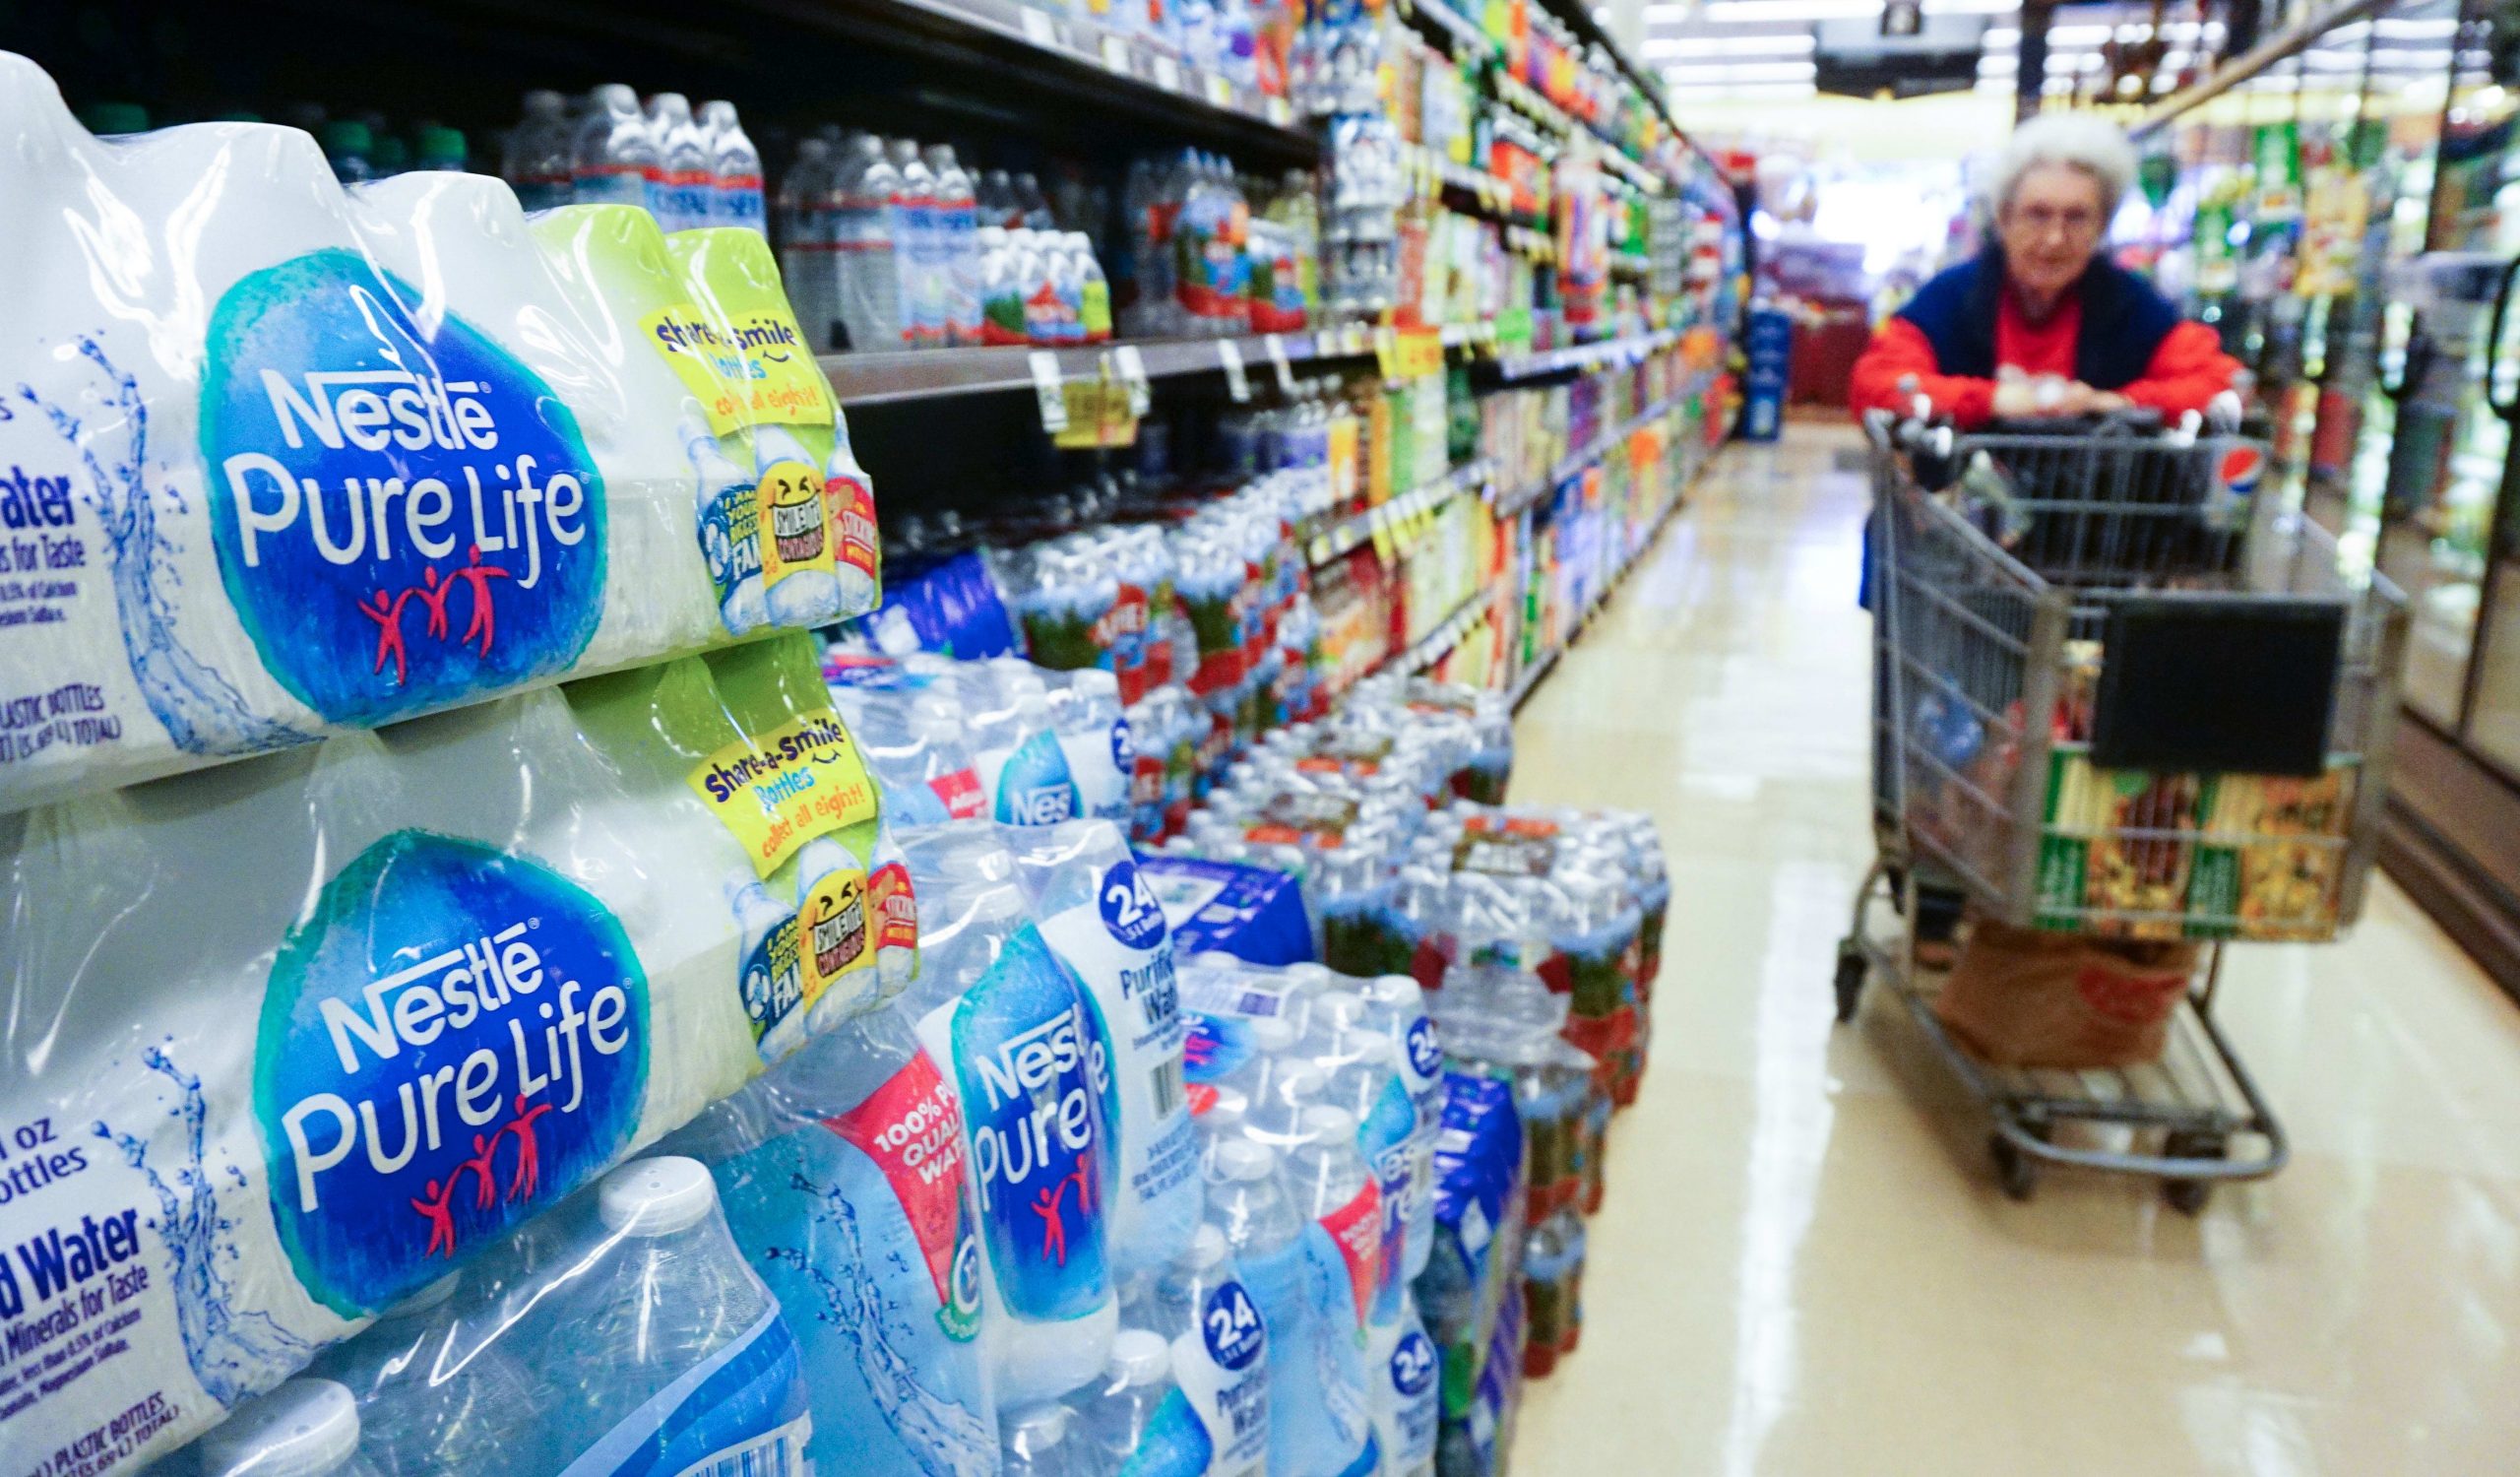 Nestle’s plan to reinvigorate bottled water development contains caffeinated water